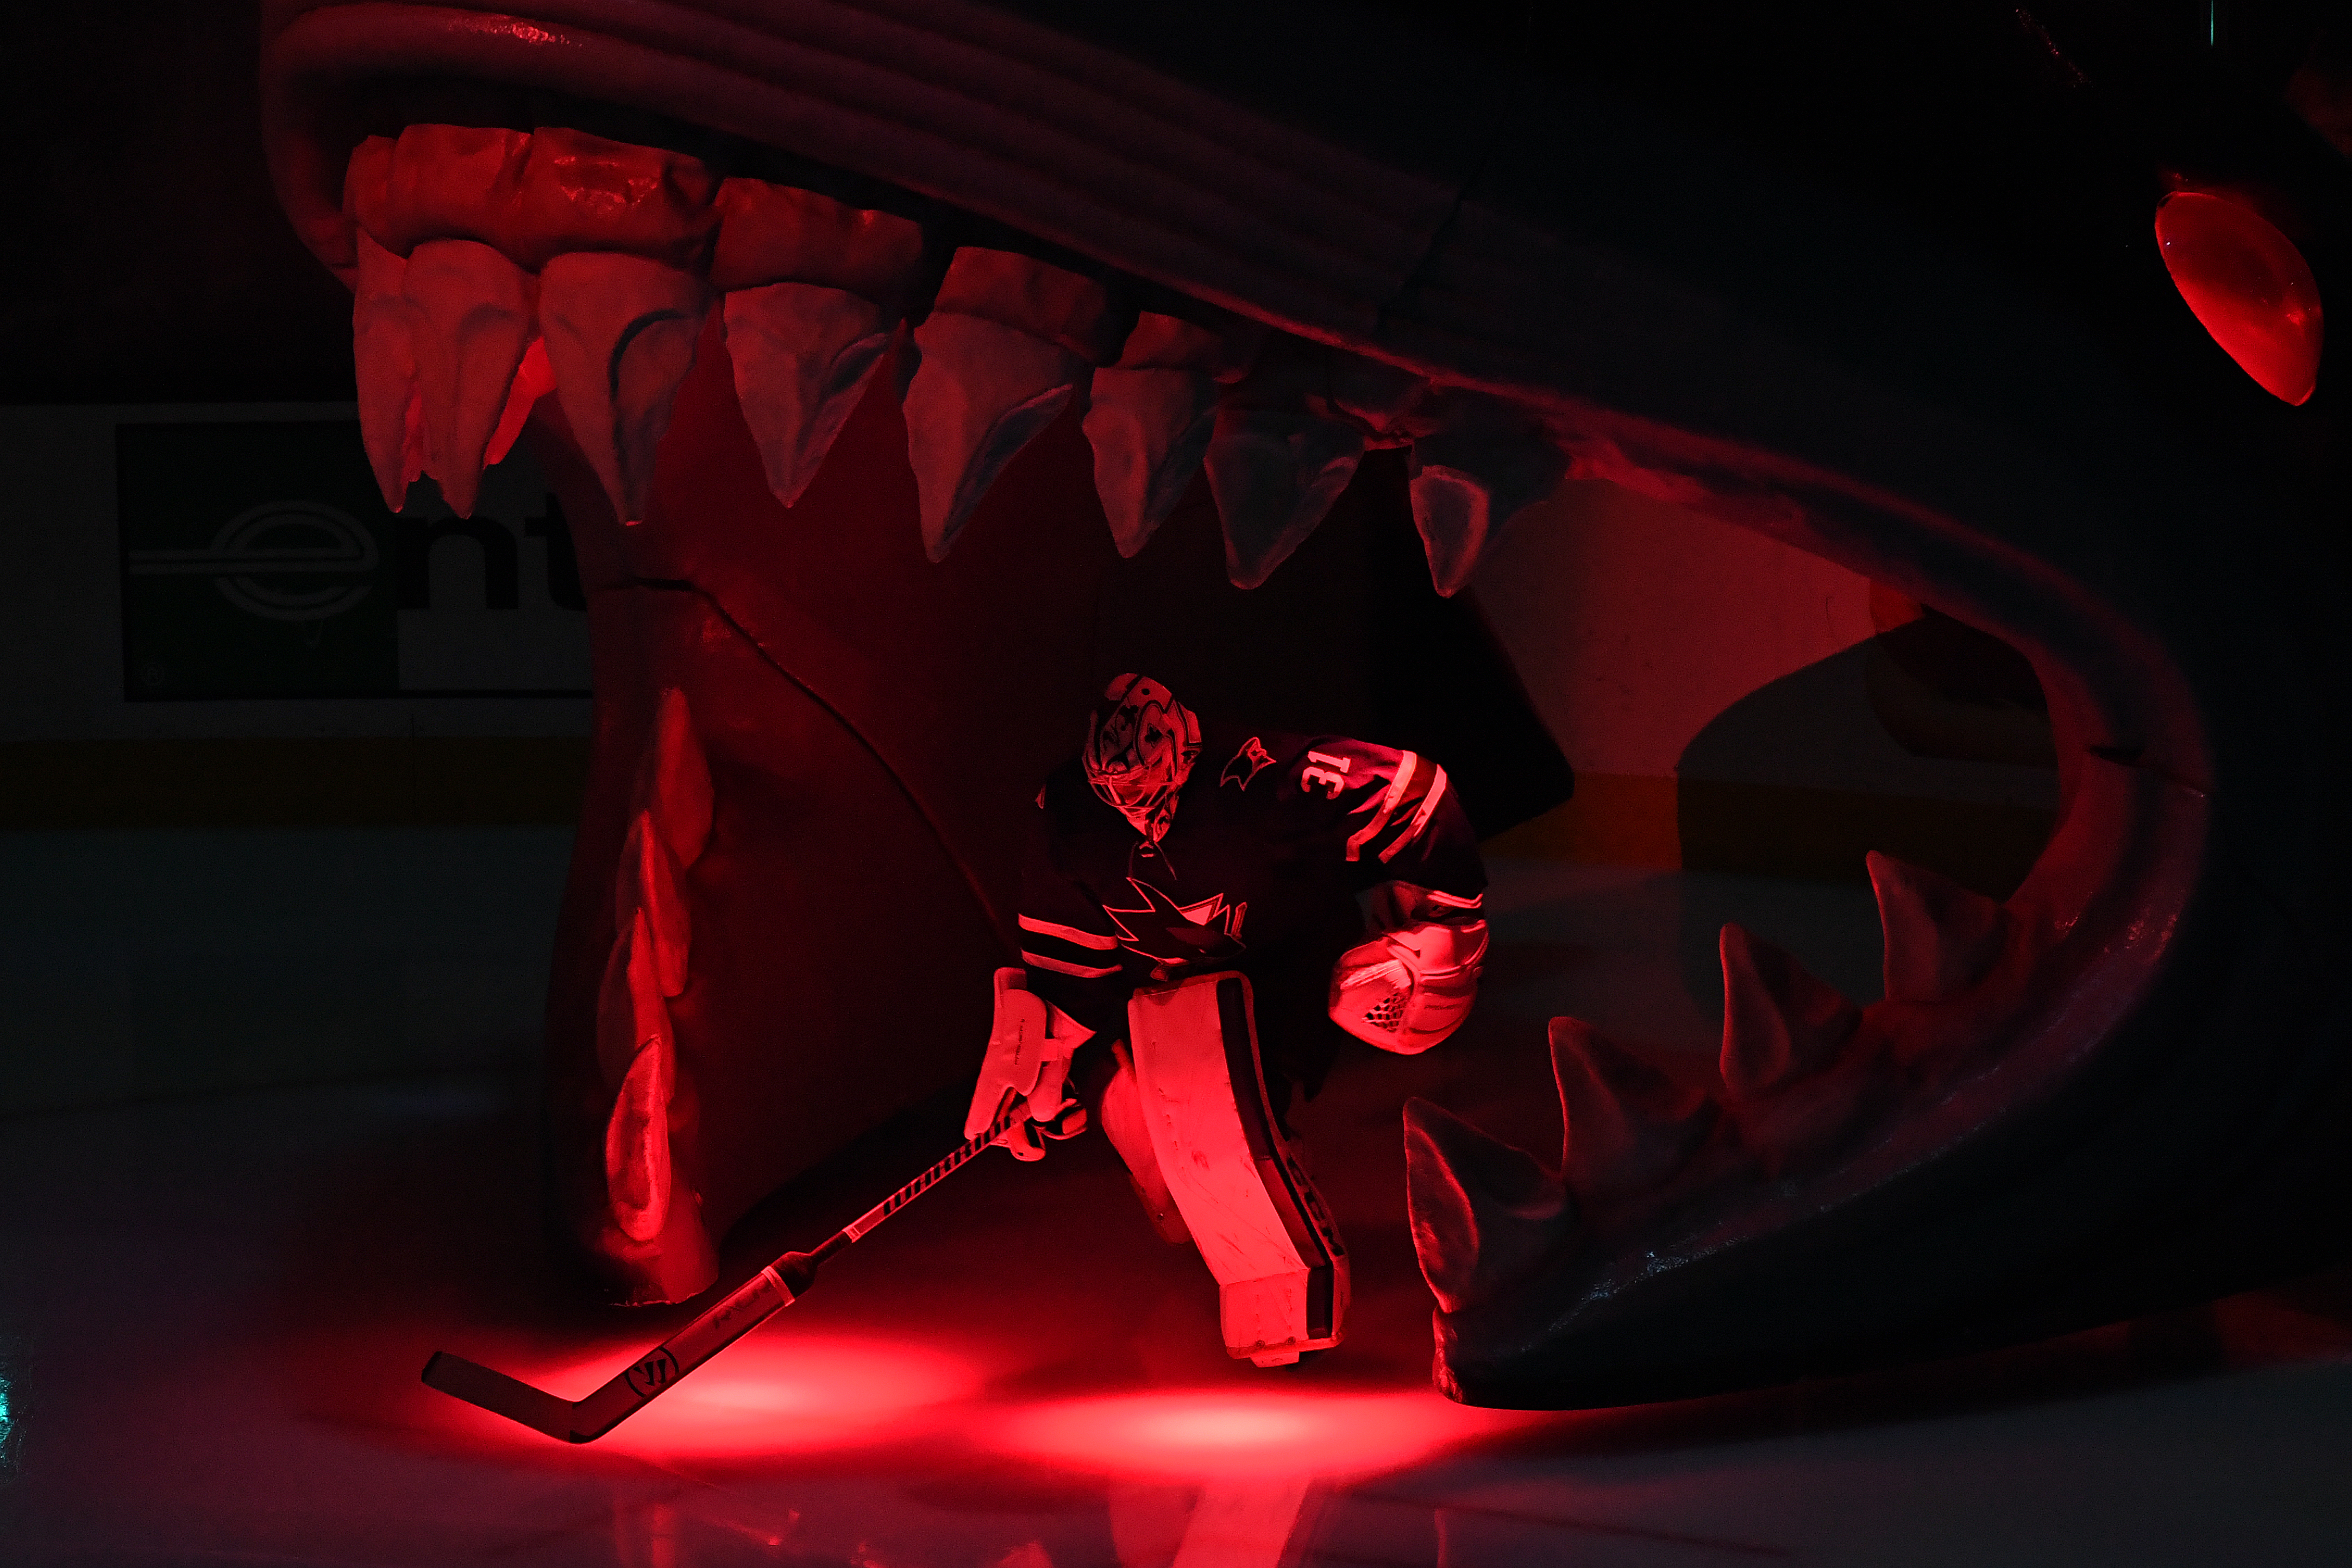 Martin Jones of the San Jose Sharks takes the ice against the St. Louis Blues prior to Game 5 of the Western Conference Final during the 2019 NHL Stanley Cup Playoffs at SAP Center on May 19, 2019 in San Jose, California.